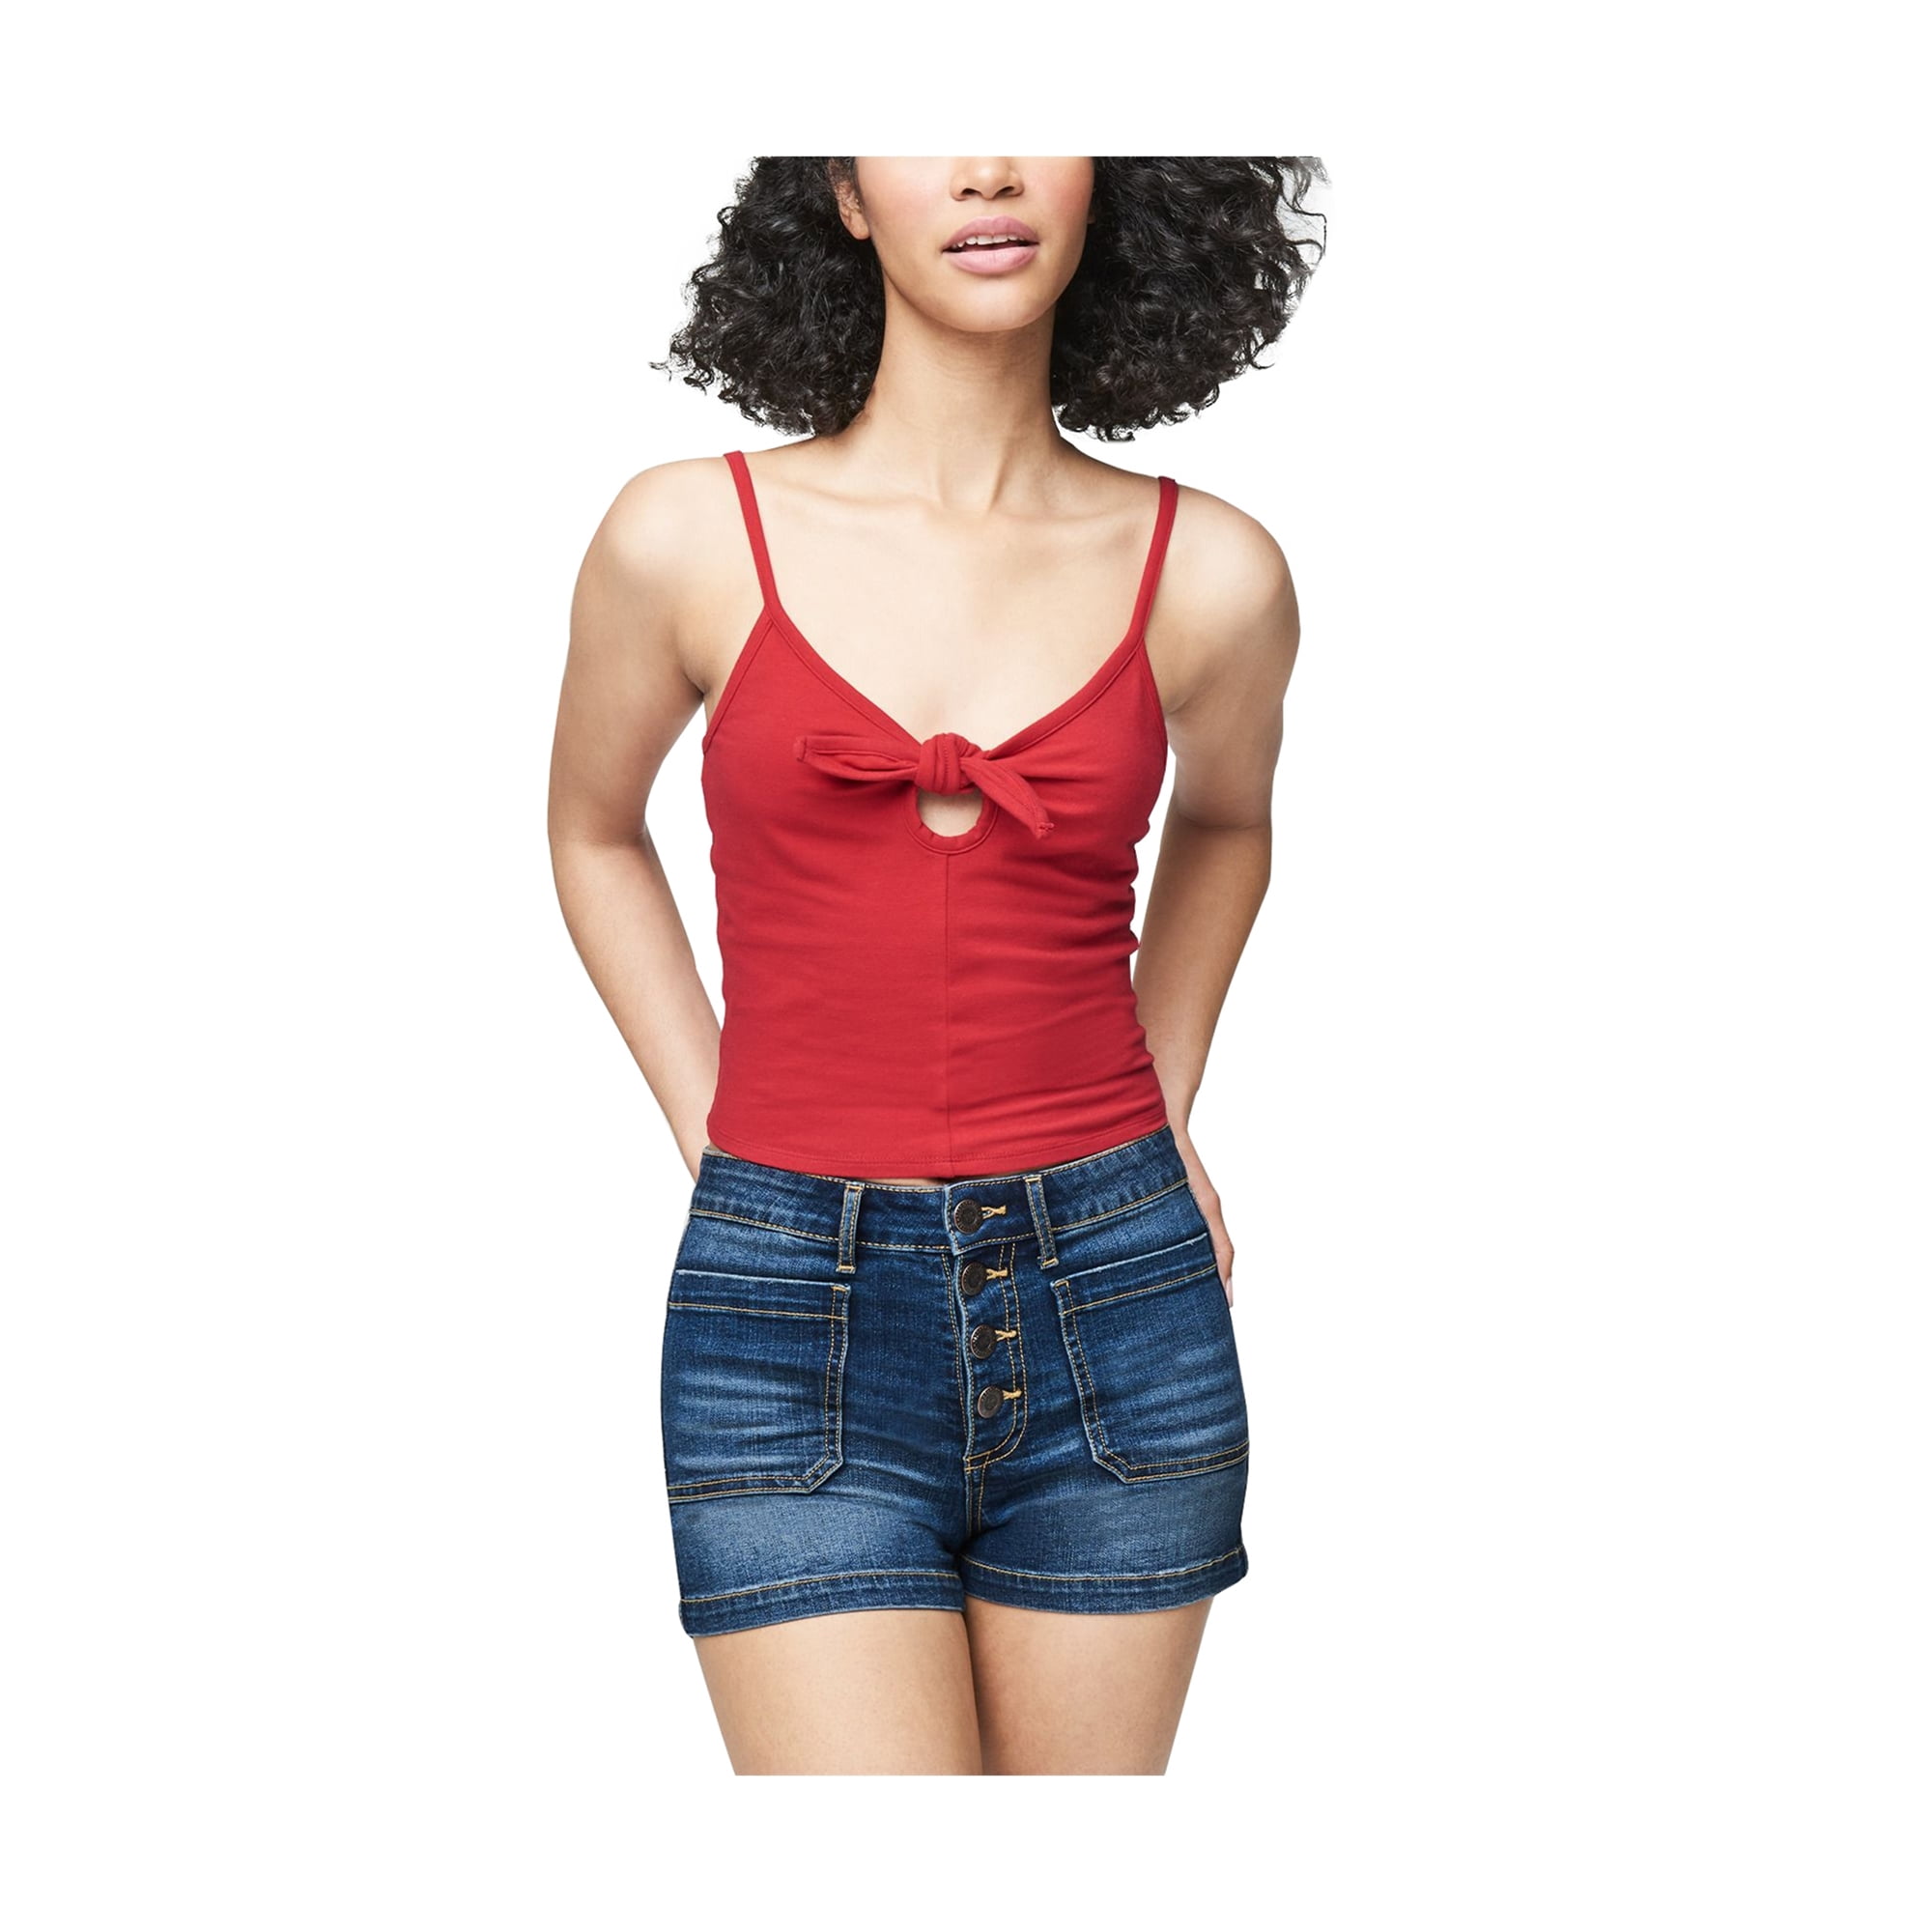 Aeropostale Womens Favorite Cami Tank Top, Red, X-Small 